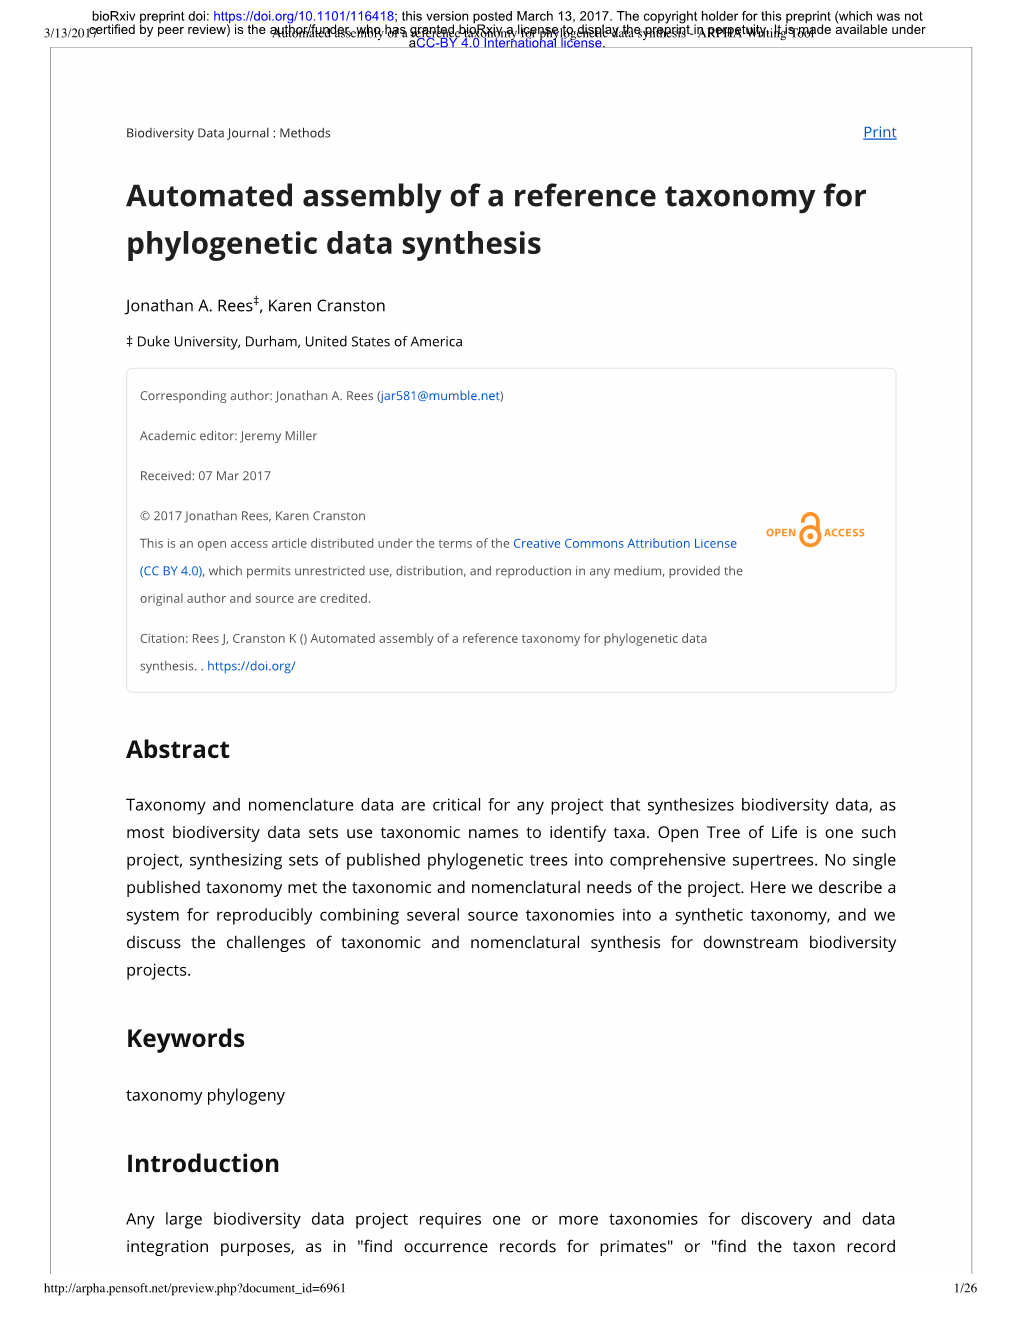 Automated Assembly of a Reference Taxonomy for Phylogenetic Data Synthesis